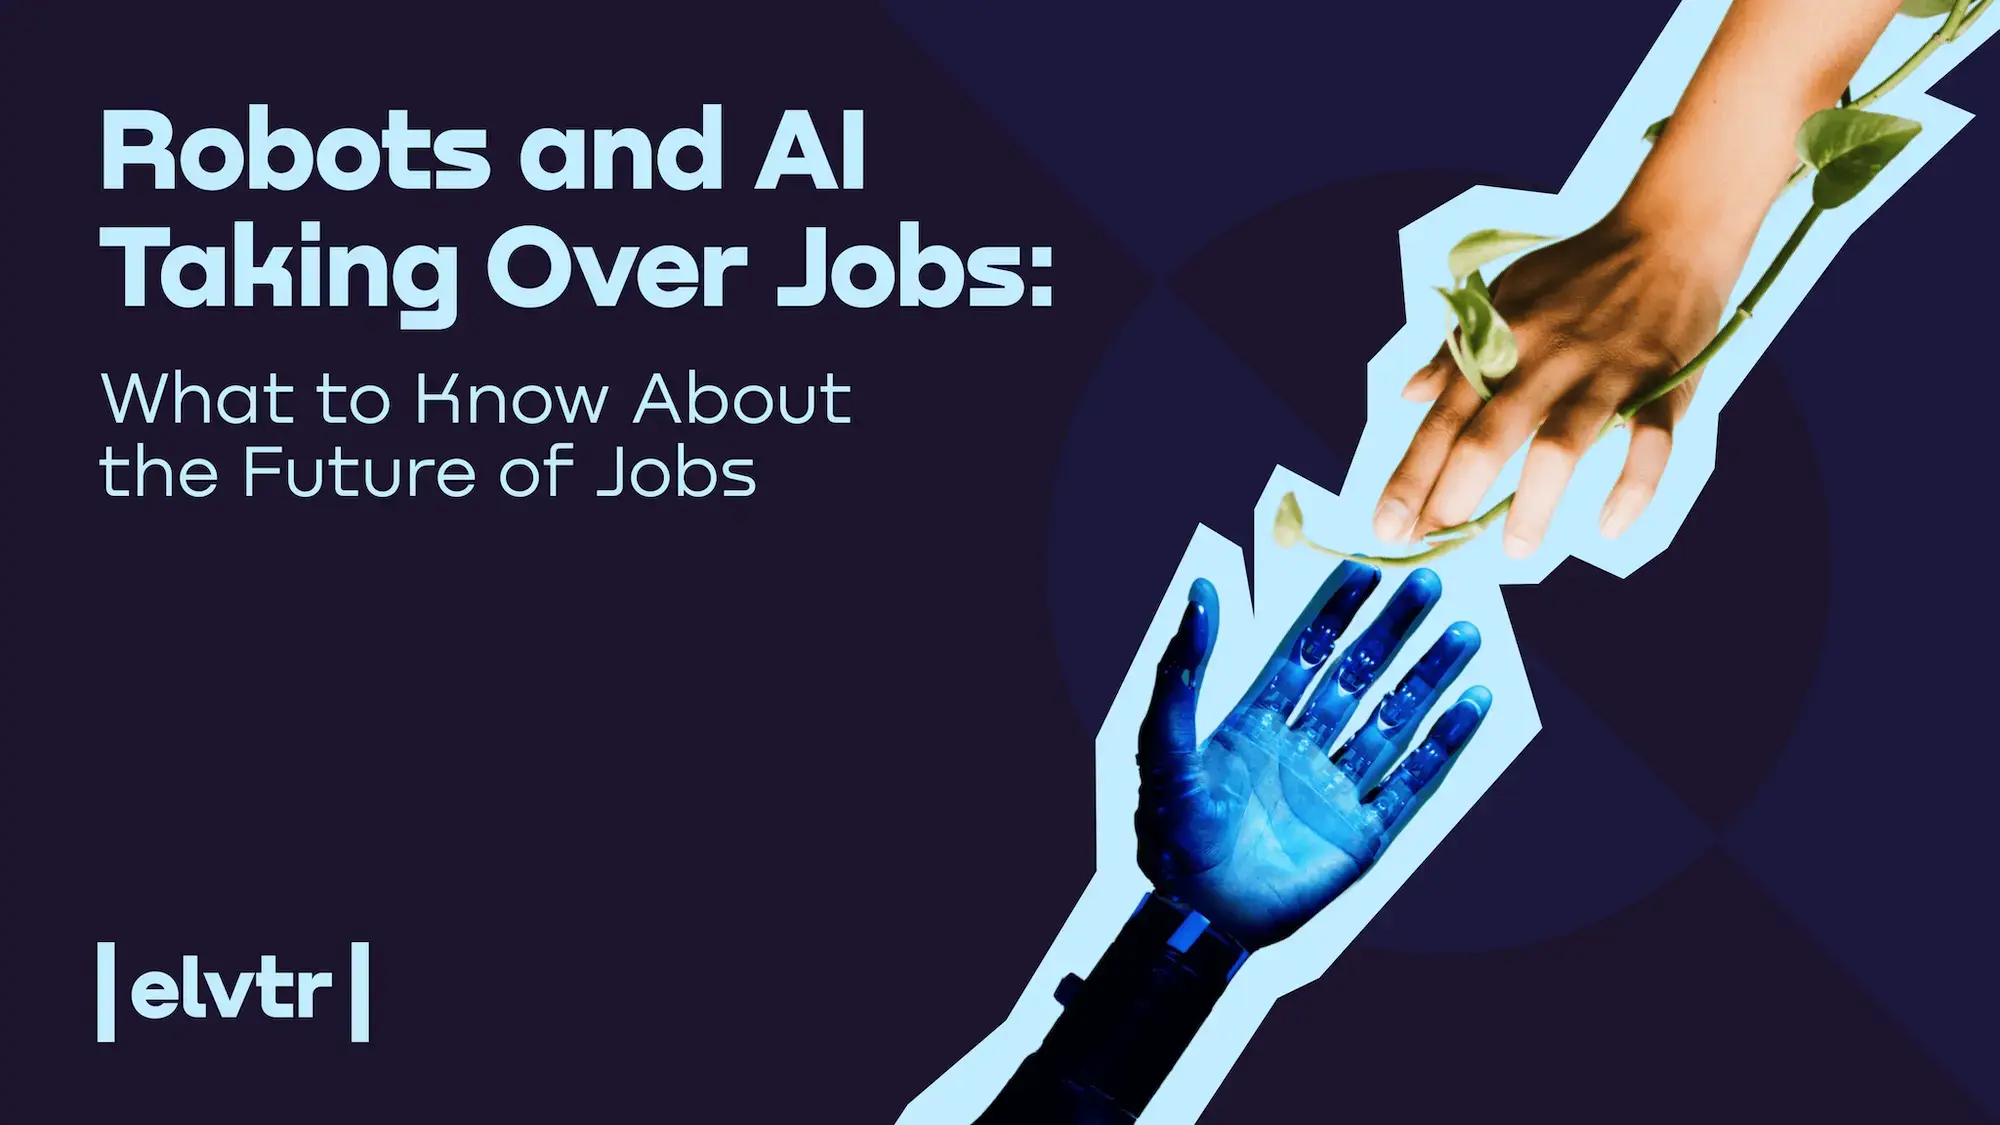 Robots and AI Taking Over Jobs: What to Know About the Future of Jobs image